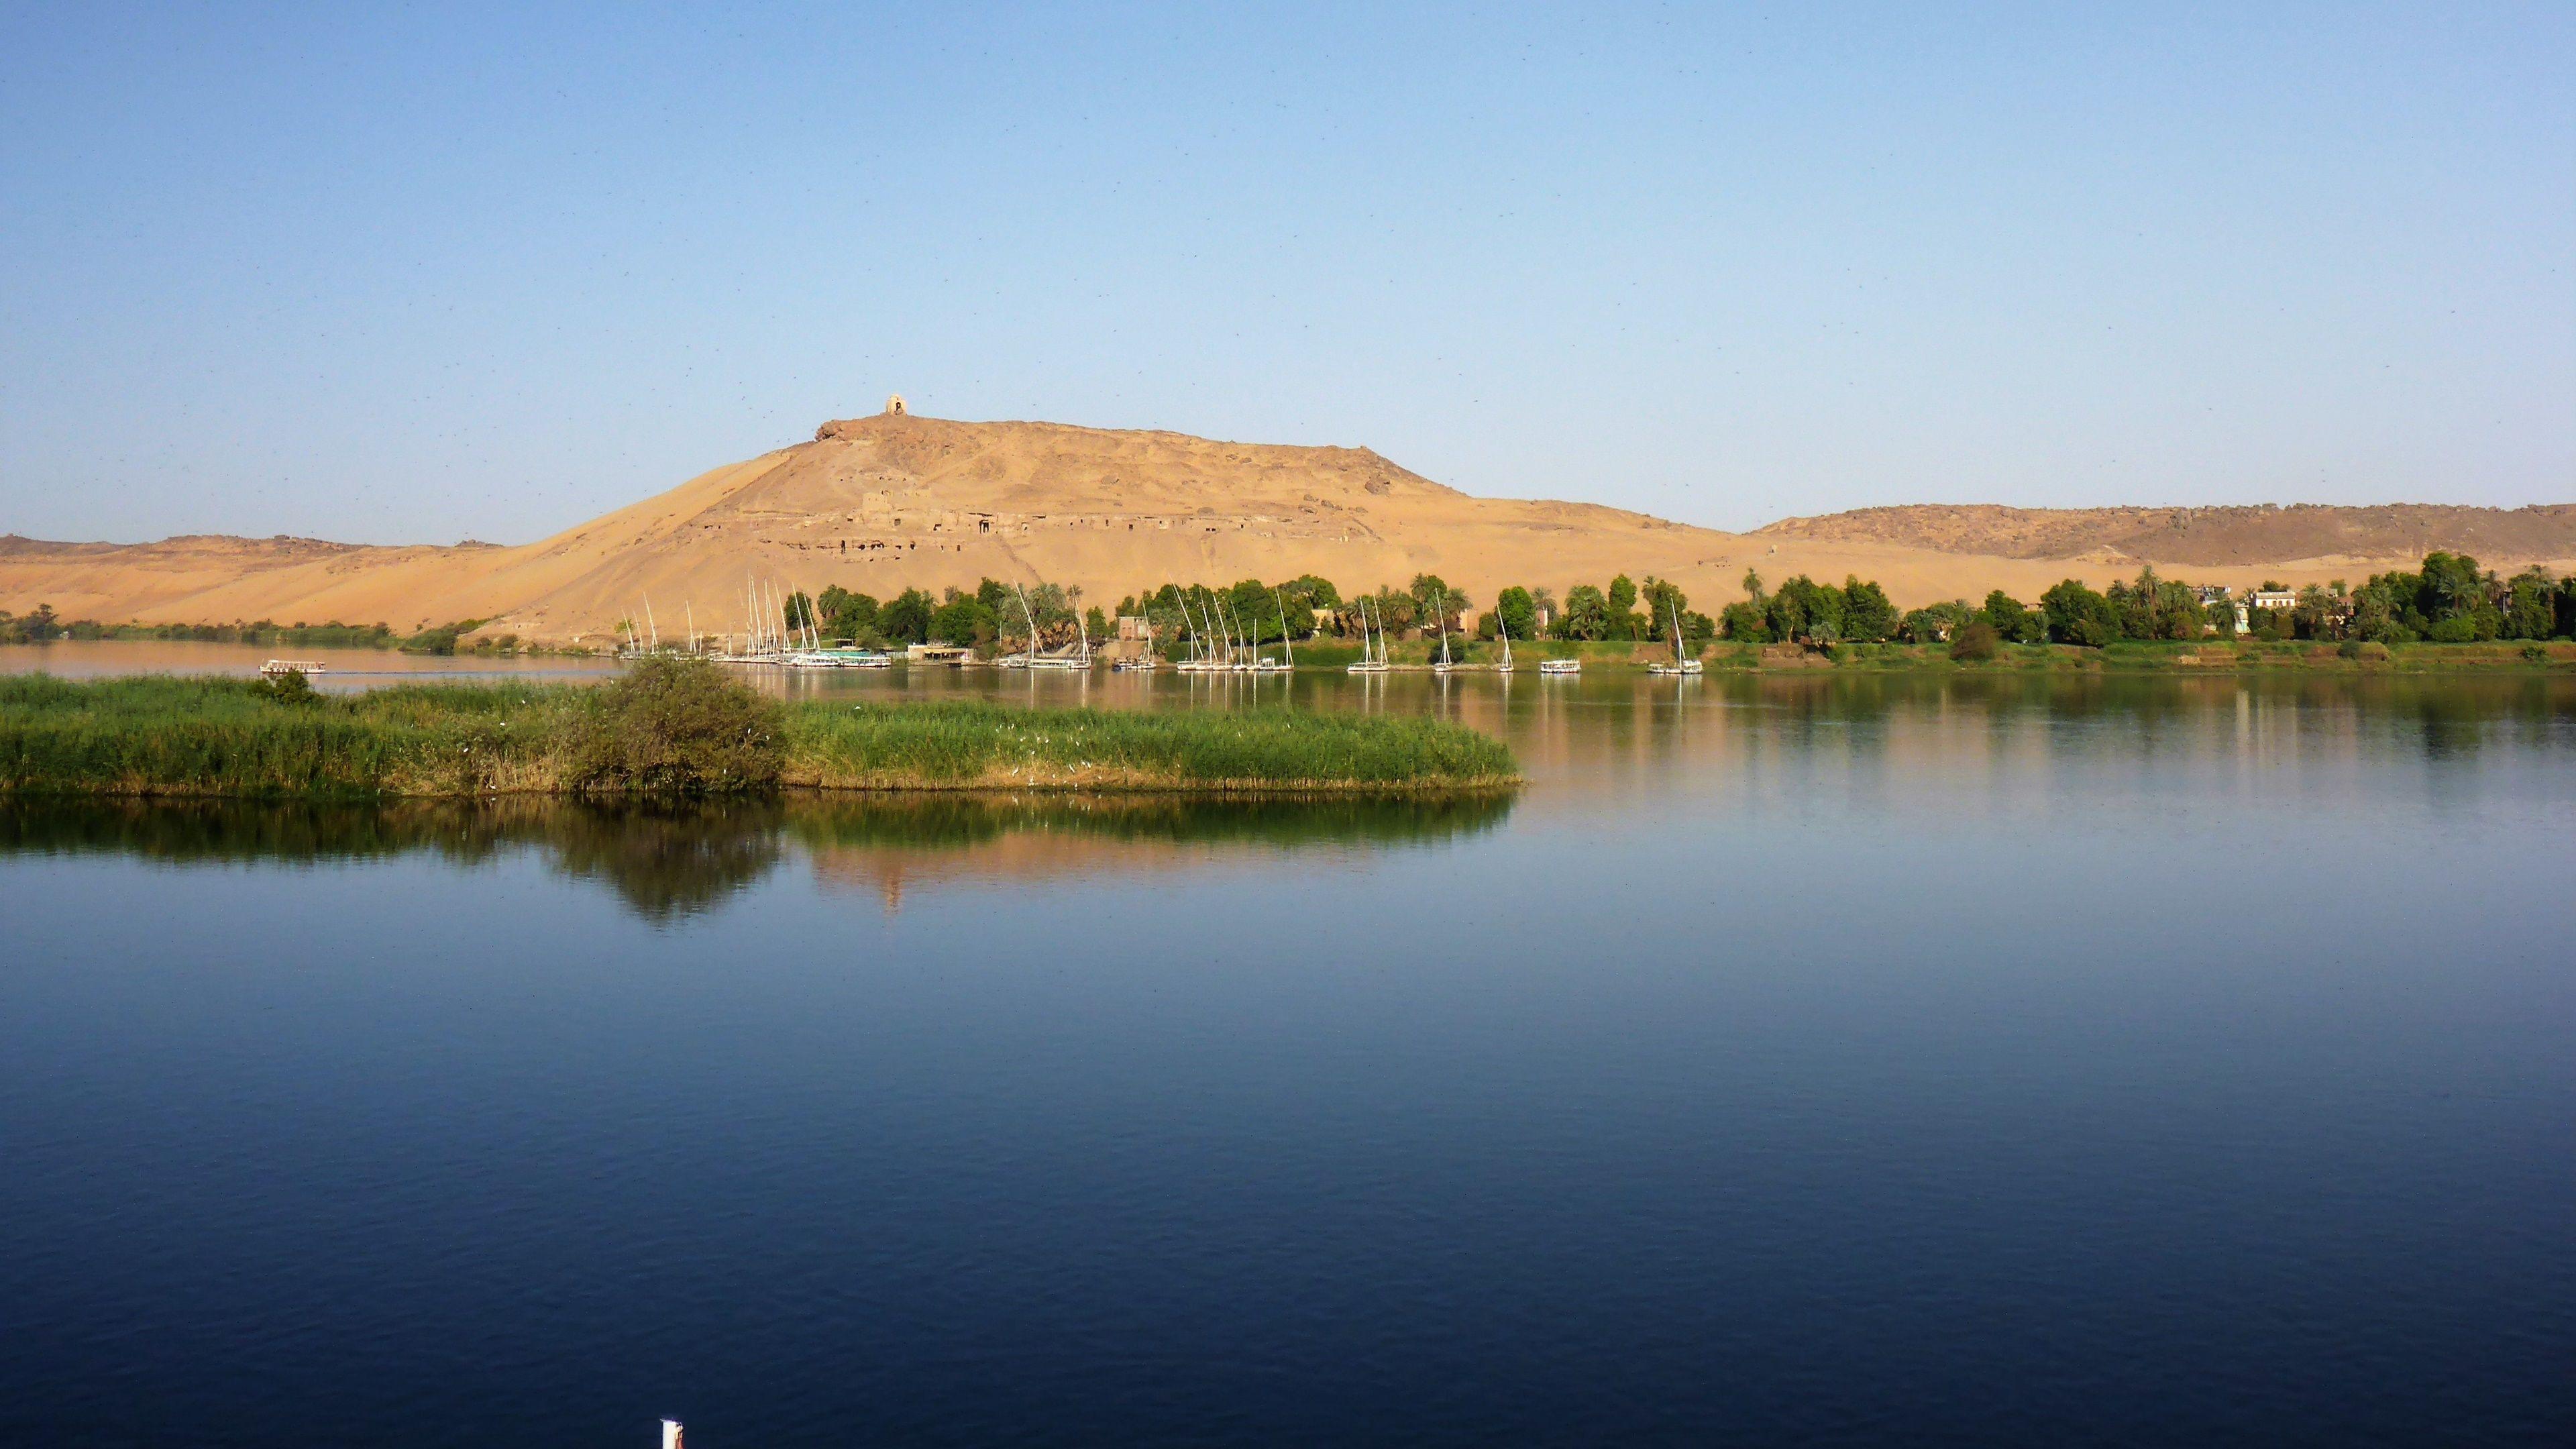 Nile River cruise tours between Luxor and Aswan